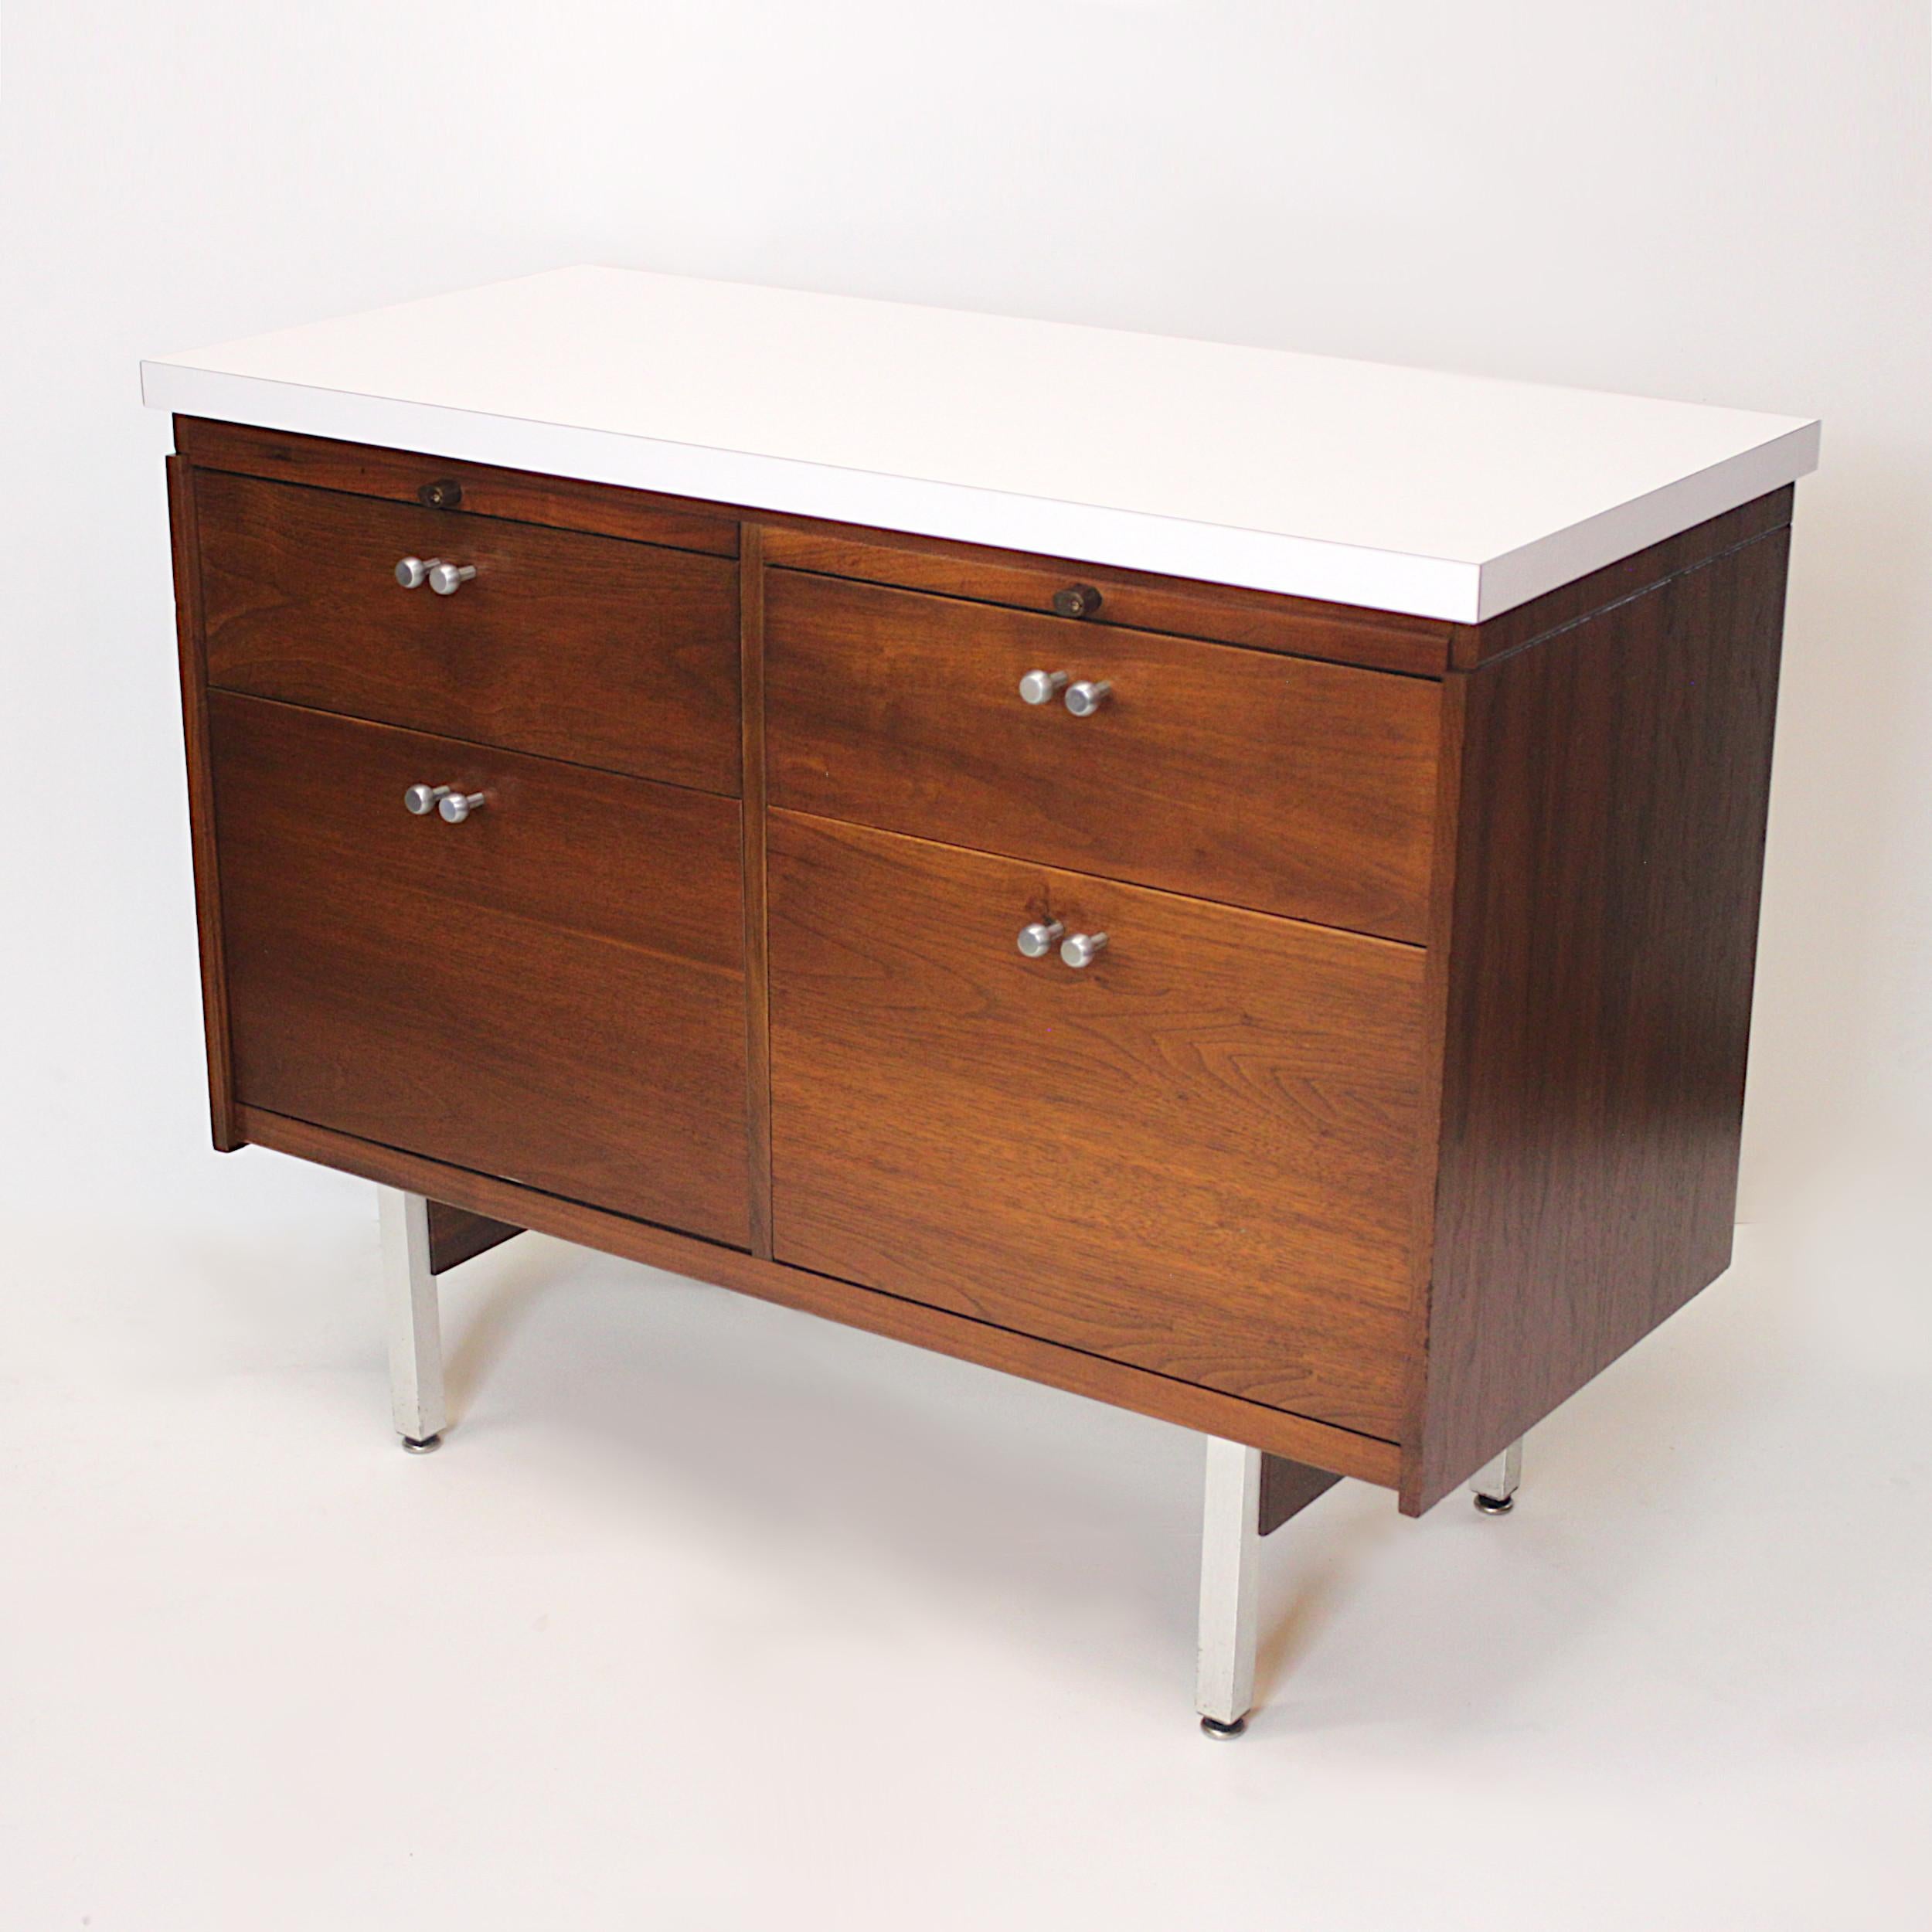 Veneer Matching Pair of Mid-Century Modern Walnut Console Cabinets by Charles Deaton